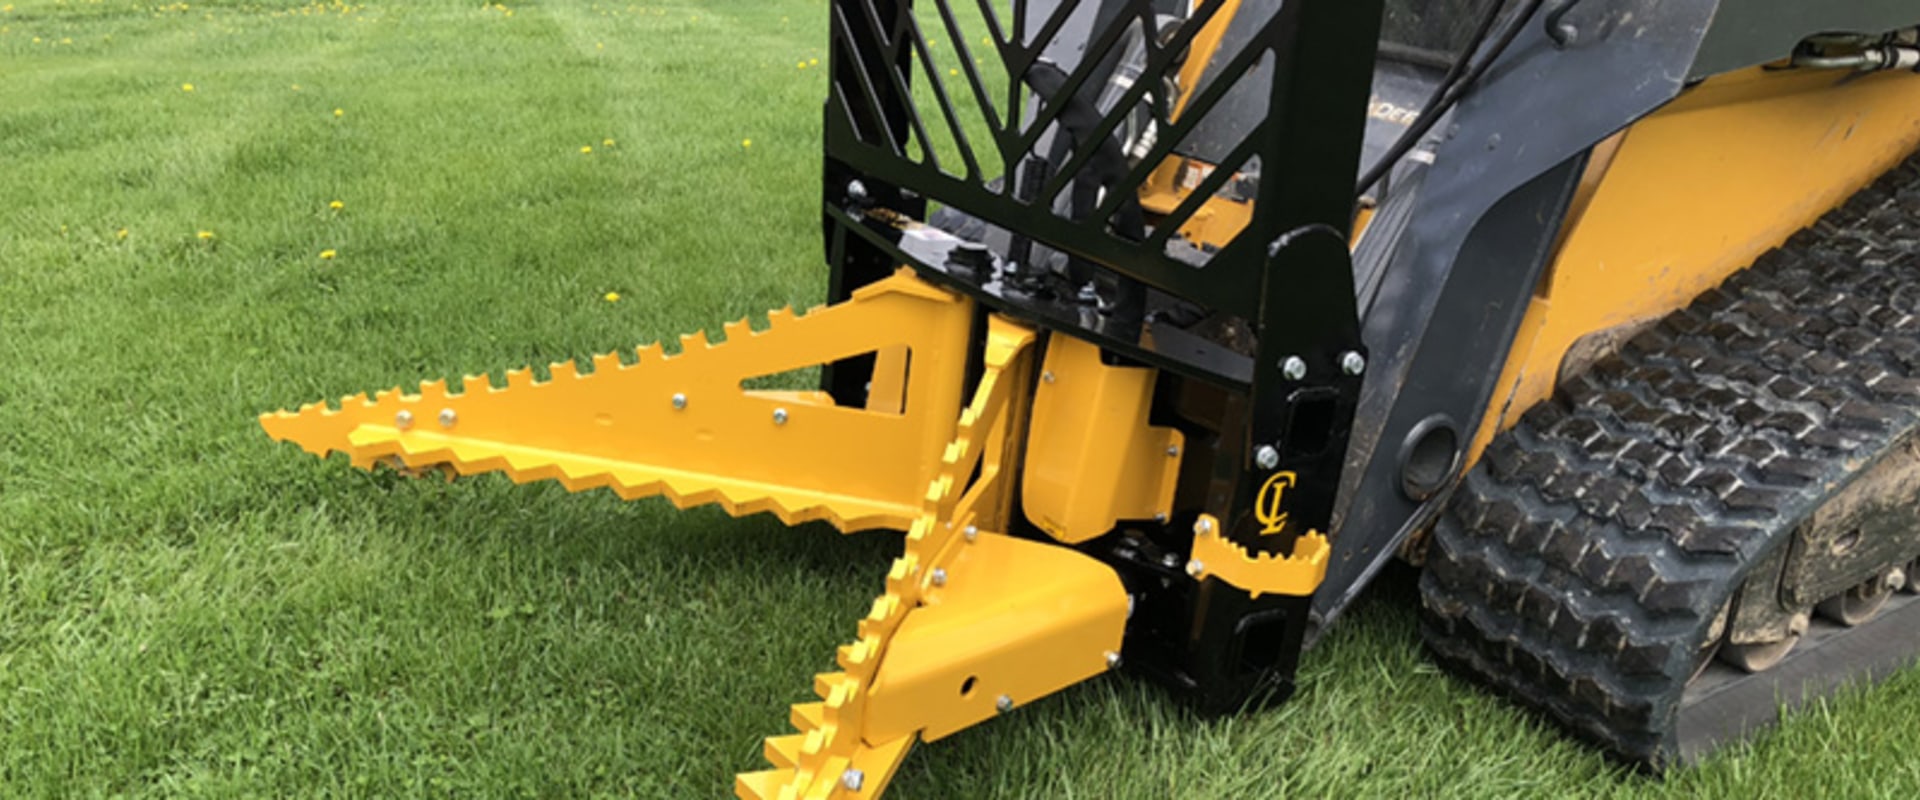 Enhance Your Home Remodel With A Skid Steer Tree Puller: Secret Weapon